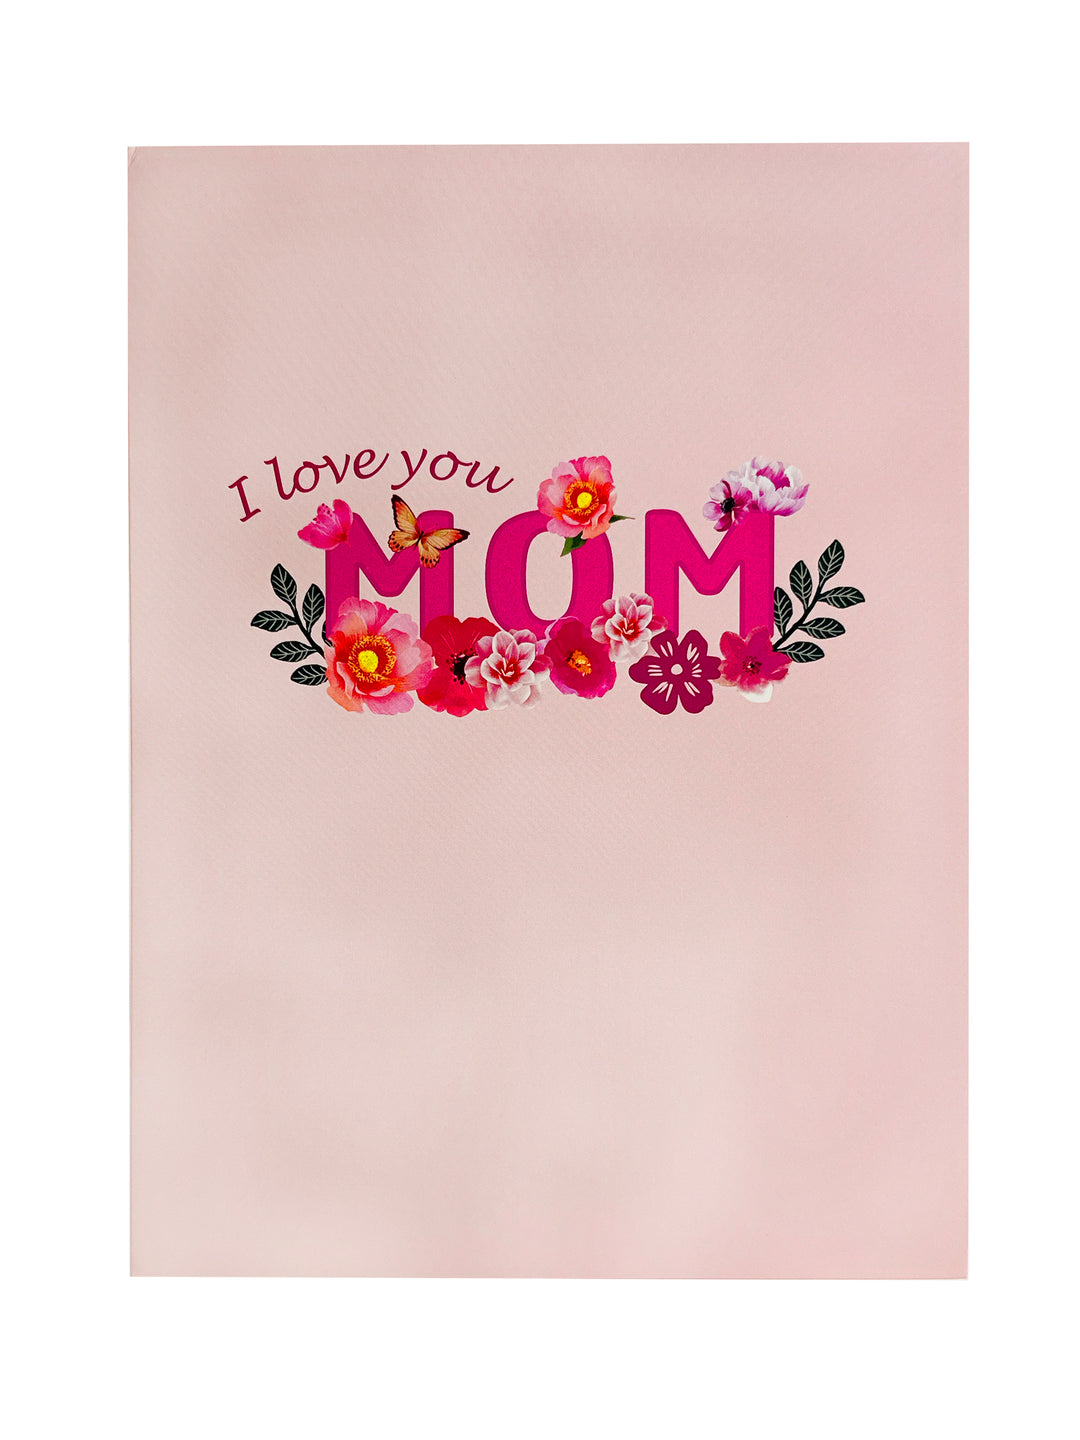 Best Mom Ever Pop-up Greeting Card